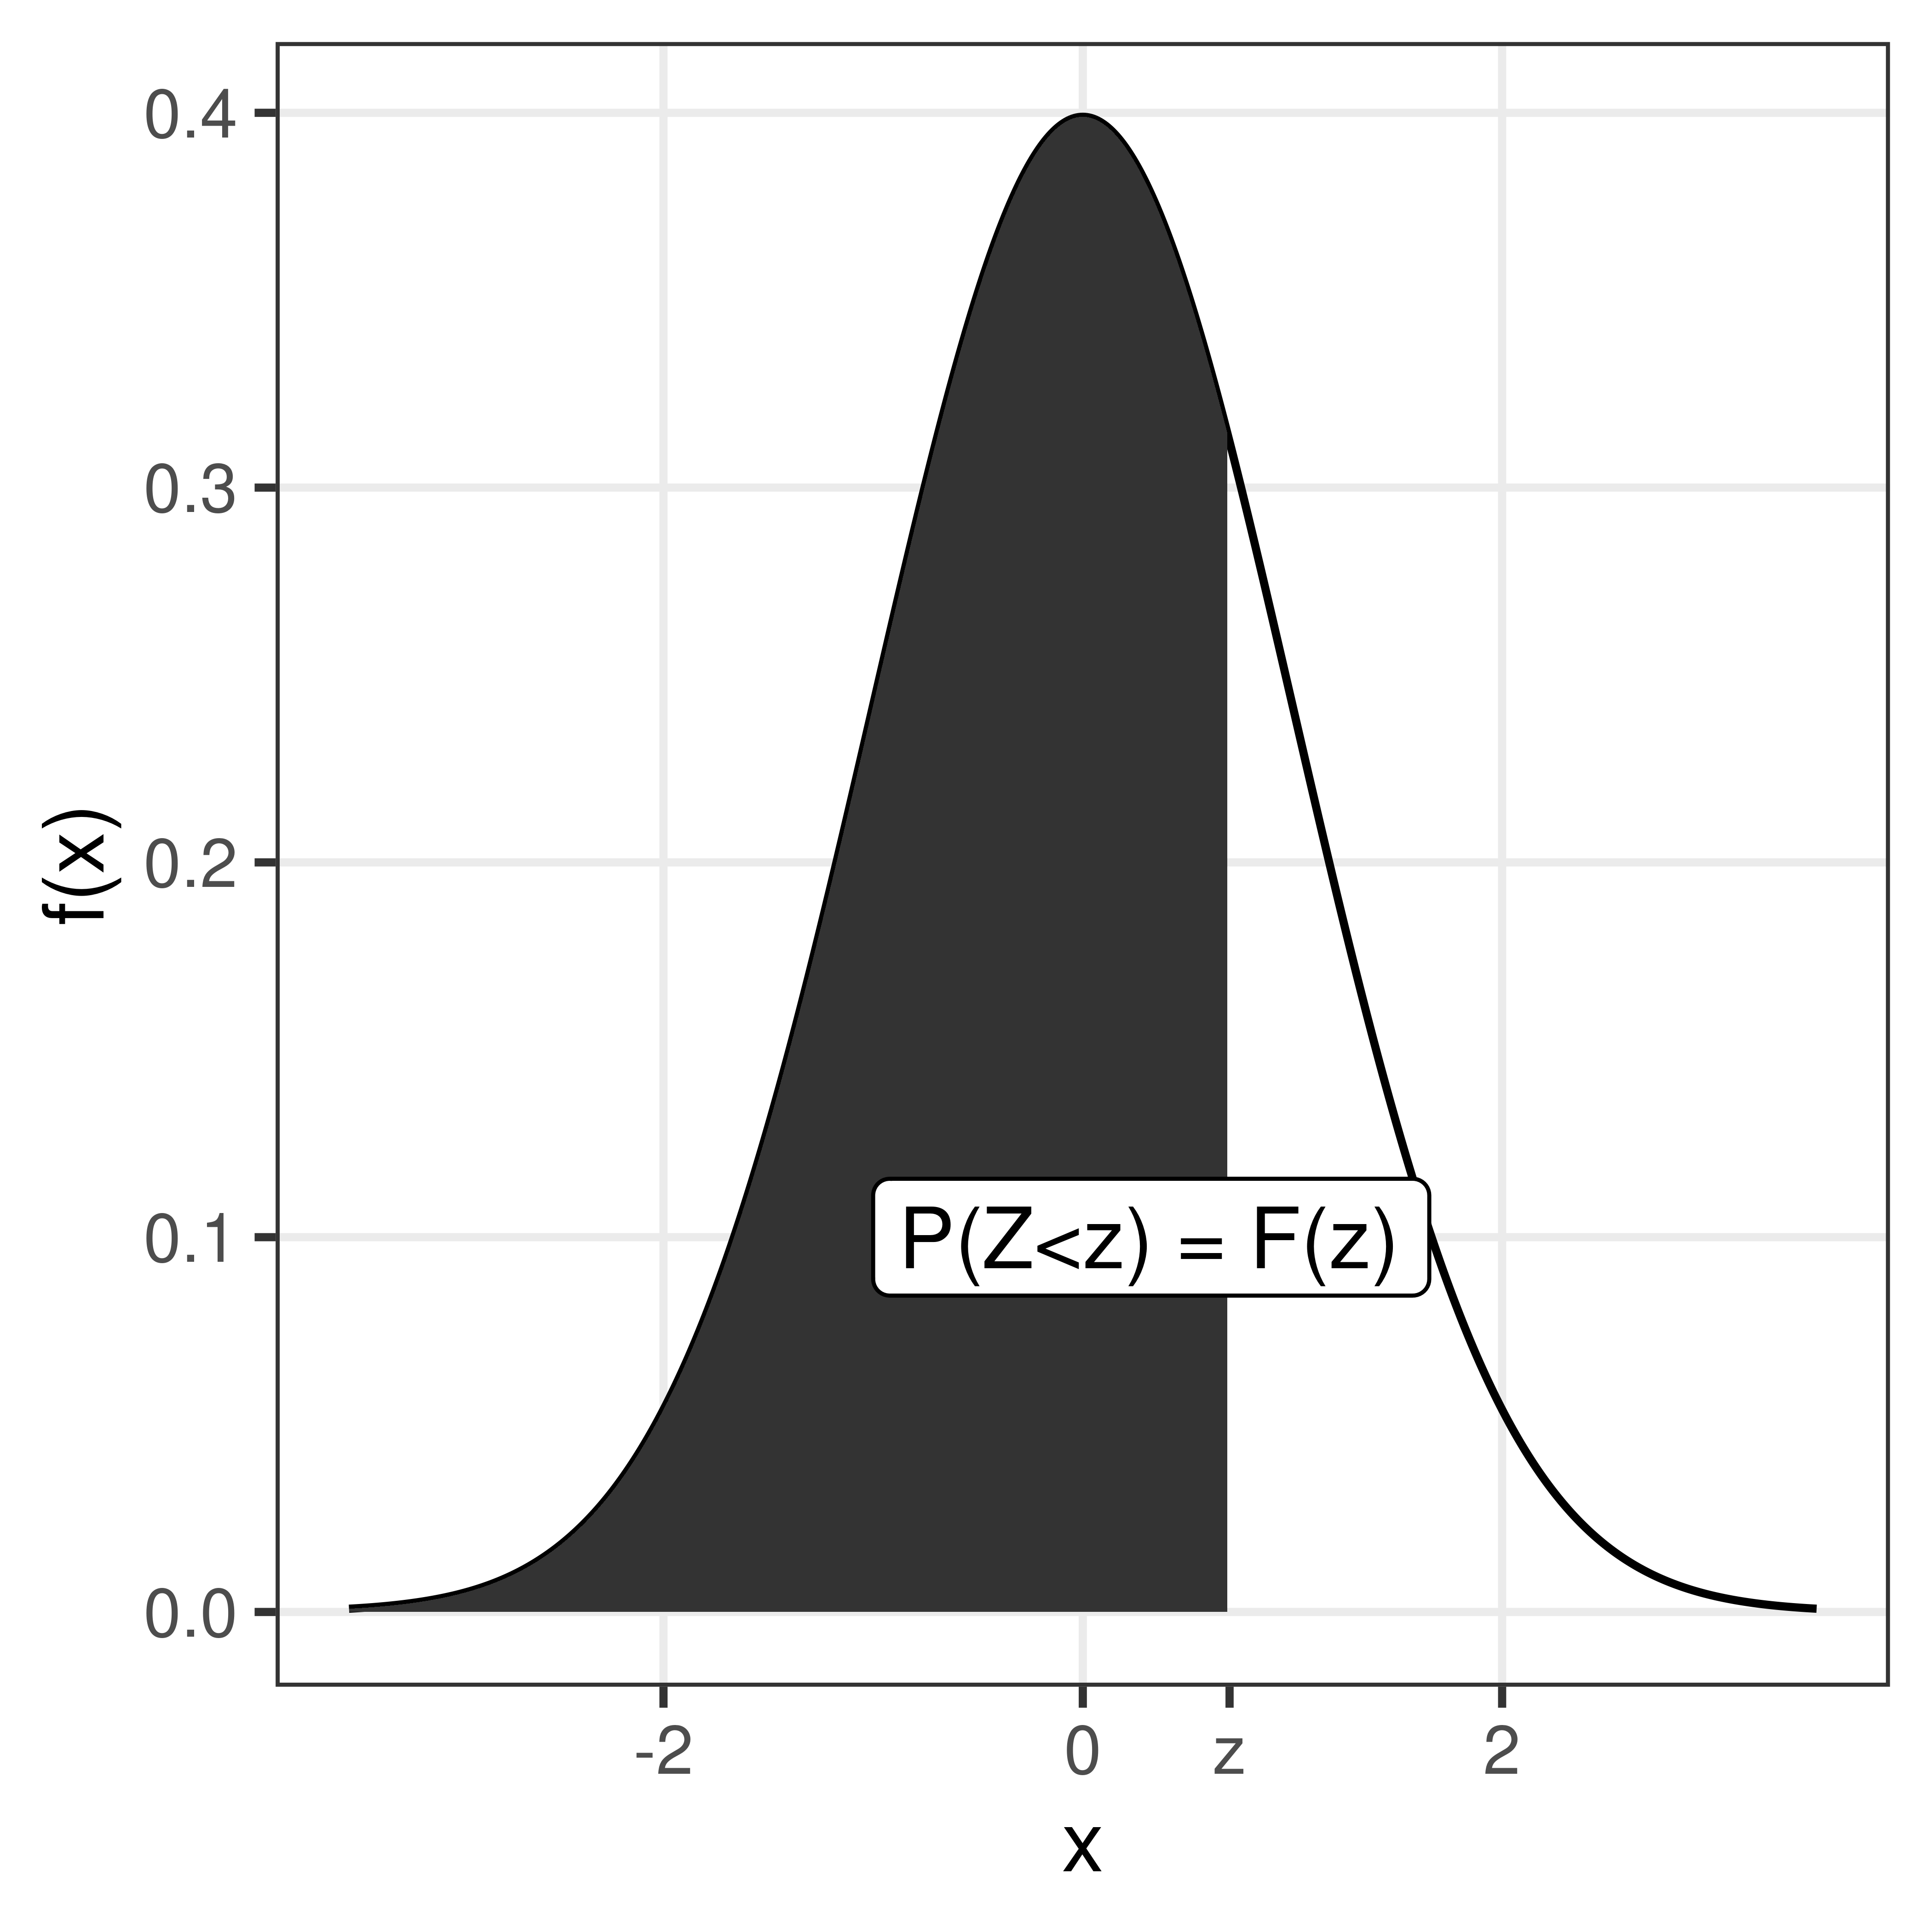 The shaded area under hte curve is the tabulated value $P(Z \leq z) = F(z)$.